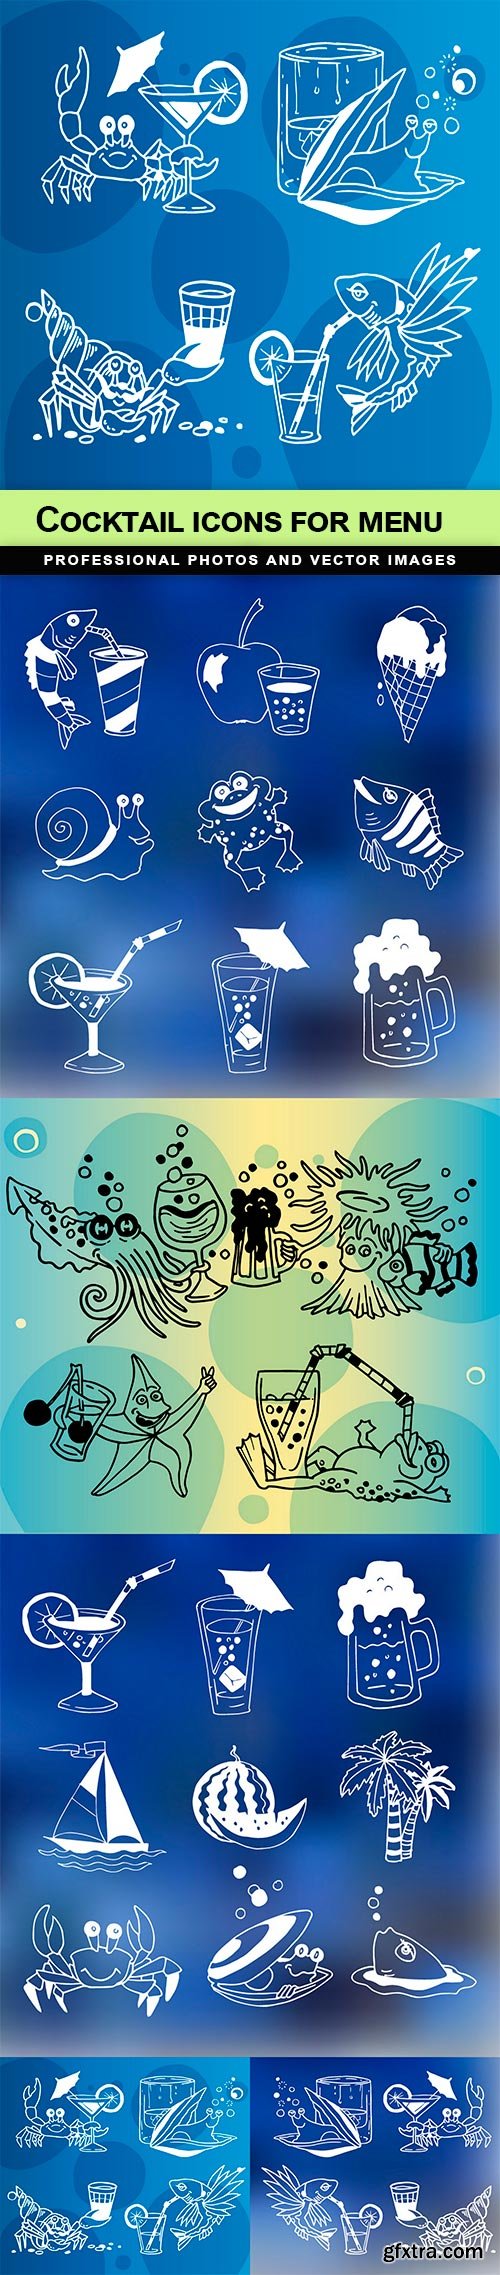 Cocktail Icons for menu - 5 EPS